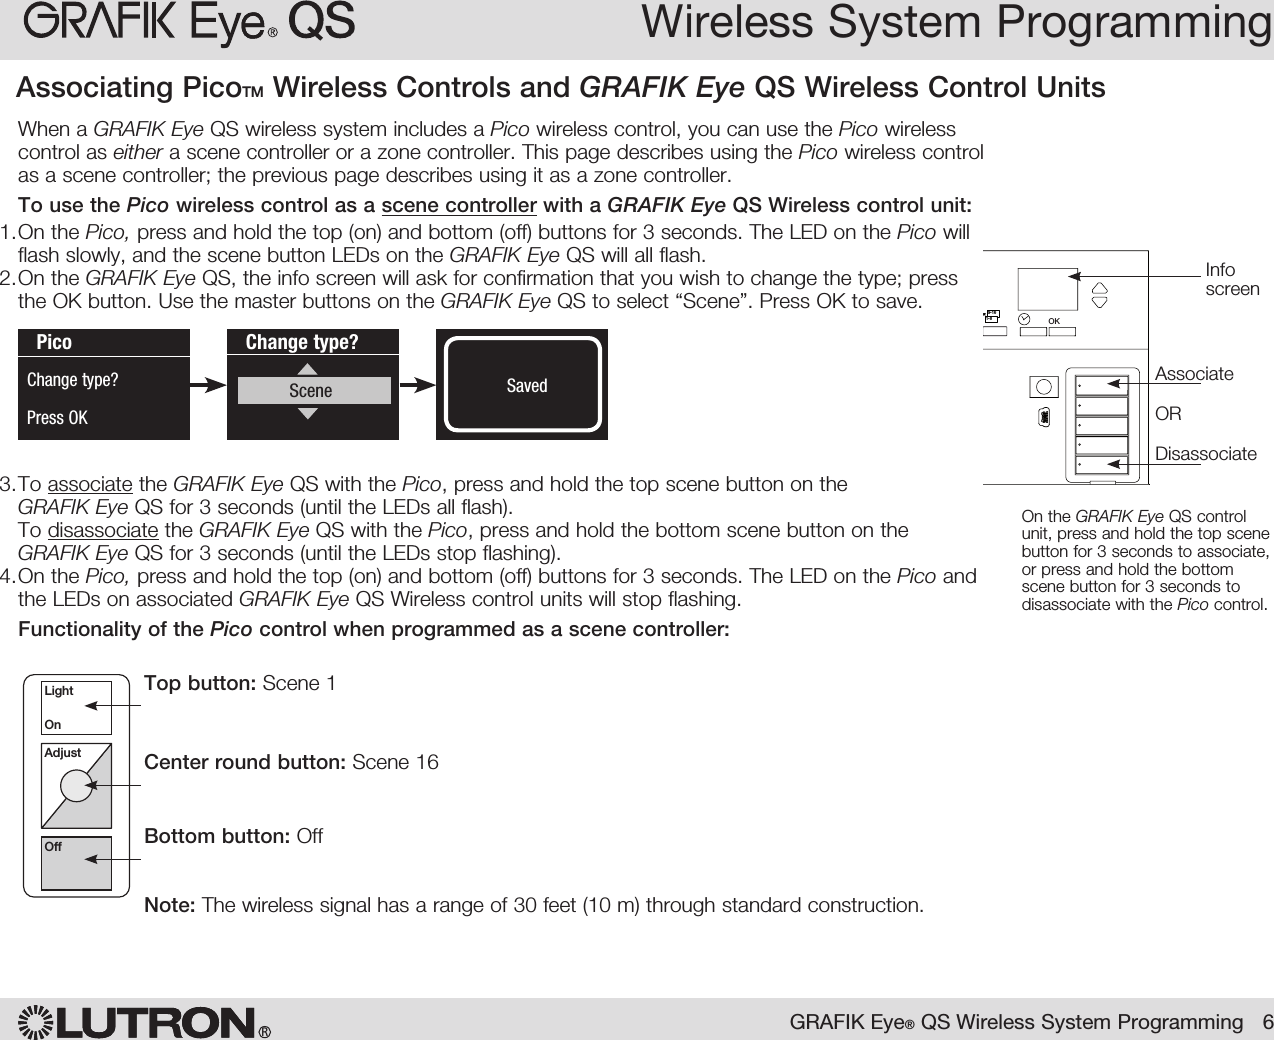 When a GRAFIK Eye QS wireless system includes a Pico wireless control, you can use the Pico wireless control as either a scene controller or a zone controller. This page describes using the Pico wireless control as a scene controller; the previous page describes using it as a zone controller.To use the Pico wireless control as a scene controller with a GRAFIK Eye QS Wireless control unit:1. On the Pico, press and hold the top (on) and bottom (off) buttons for 3 seconds. The LED on the Pico will flash slowly, and the scene button LEDs on the GRAFIK Eye QS will all flash.2. On the GRAFIK Eye QS, the info screen will ask for confirmation that you wish to change the type; press the OK button. Use the master buttons on the GRAFIK Eye QS to select “Scene”. Press OK to save.3. To associate the GRAFIK Eye QS with the Pico, press and hold the top scene button on the  GRAFIK Eye QS for 3 seconds (until the LEDs all flash). To disassociate the GRAFIK Eye QS with the Pico, press and hold the bottom scene button on the GRAFIK Eye QS for 3 seconds (until the LEDs stop flashing).4. On the Pico, press and hold the top (on) and bottom (off) buttons for 3 seconds. The LED on the Pico and the LEDs on associated GRAFIK Eye QS Wireless control units will stop flashing.Functionality of the Pico control when programmed as a scene controller:Top button: Scene 1Center round button: Scene 16Bottom button: OffNote: The wireless signal has a range of 30 feet (10 m) through standard construction.Wireless System ProgrammingRGRAFIK Eye® QS Wireless System Programming   6LightOnAdjustOffChange type?Scene SavedSavedPicoChange type?Press OKOK1 2 34569 10 11 12 13 14 7815 169-161-8On the GRAFIK Eye QS control unit, press and hold the top scene button for 3 seconds to associate, or press and hold the bottom scene button for 3 seconds to disassociate with the Pico control.AssociateORDisassociateInfo screenAssociating PicoTM Wireless Controls and GRAFIK Eye QS Wireless Control Units